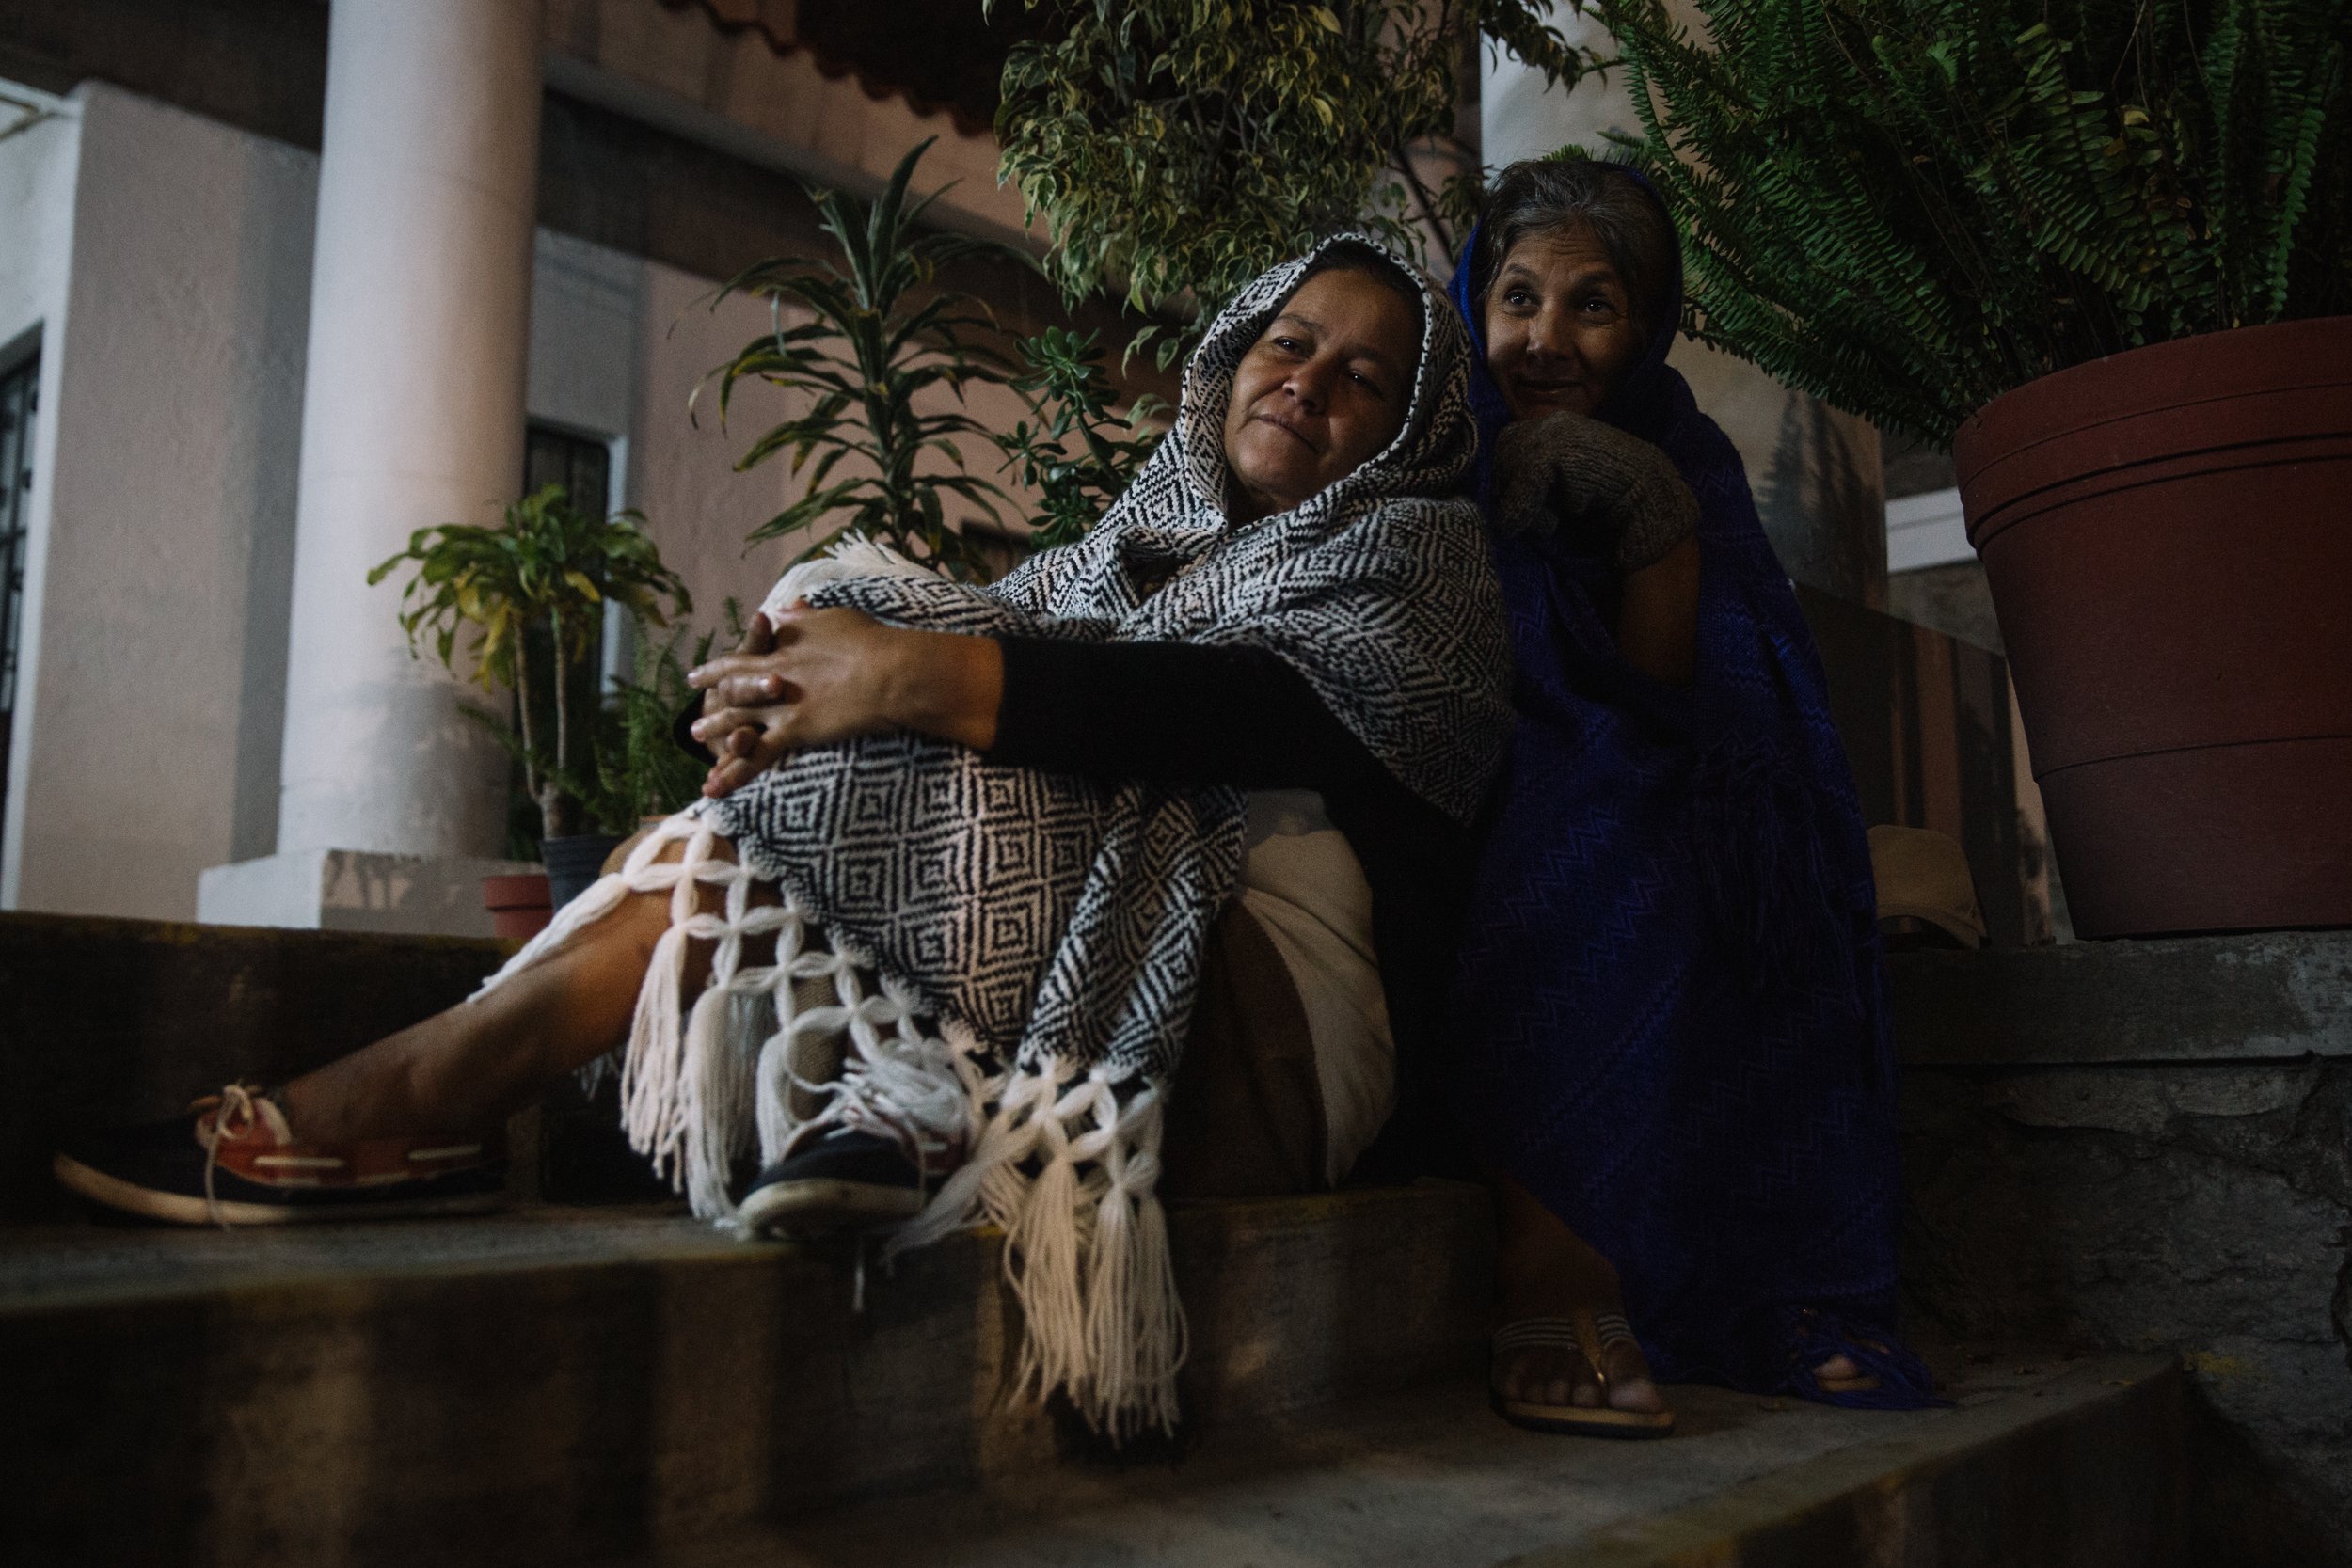  Skipping mass, Guadalupe Mendoza bundles up with another mother at Parroquia Nuestra Señora de la Asuncion in Puebla, Mexico. While the mothers attend special masses in honor of their missing loved ones, they often find solace and friendship in each